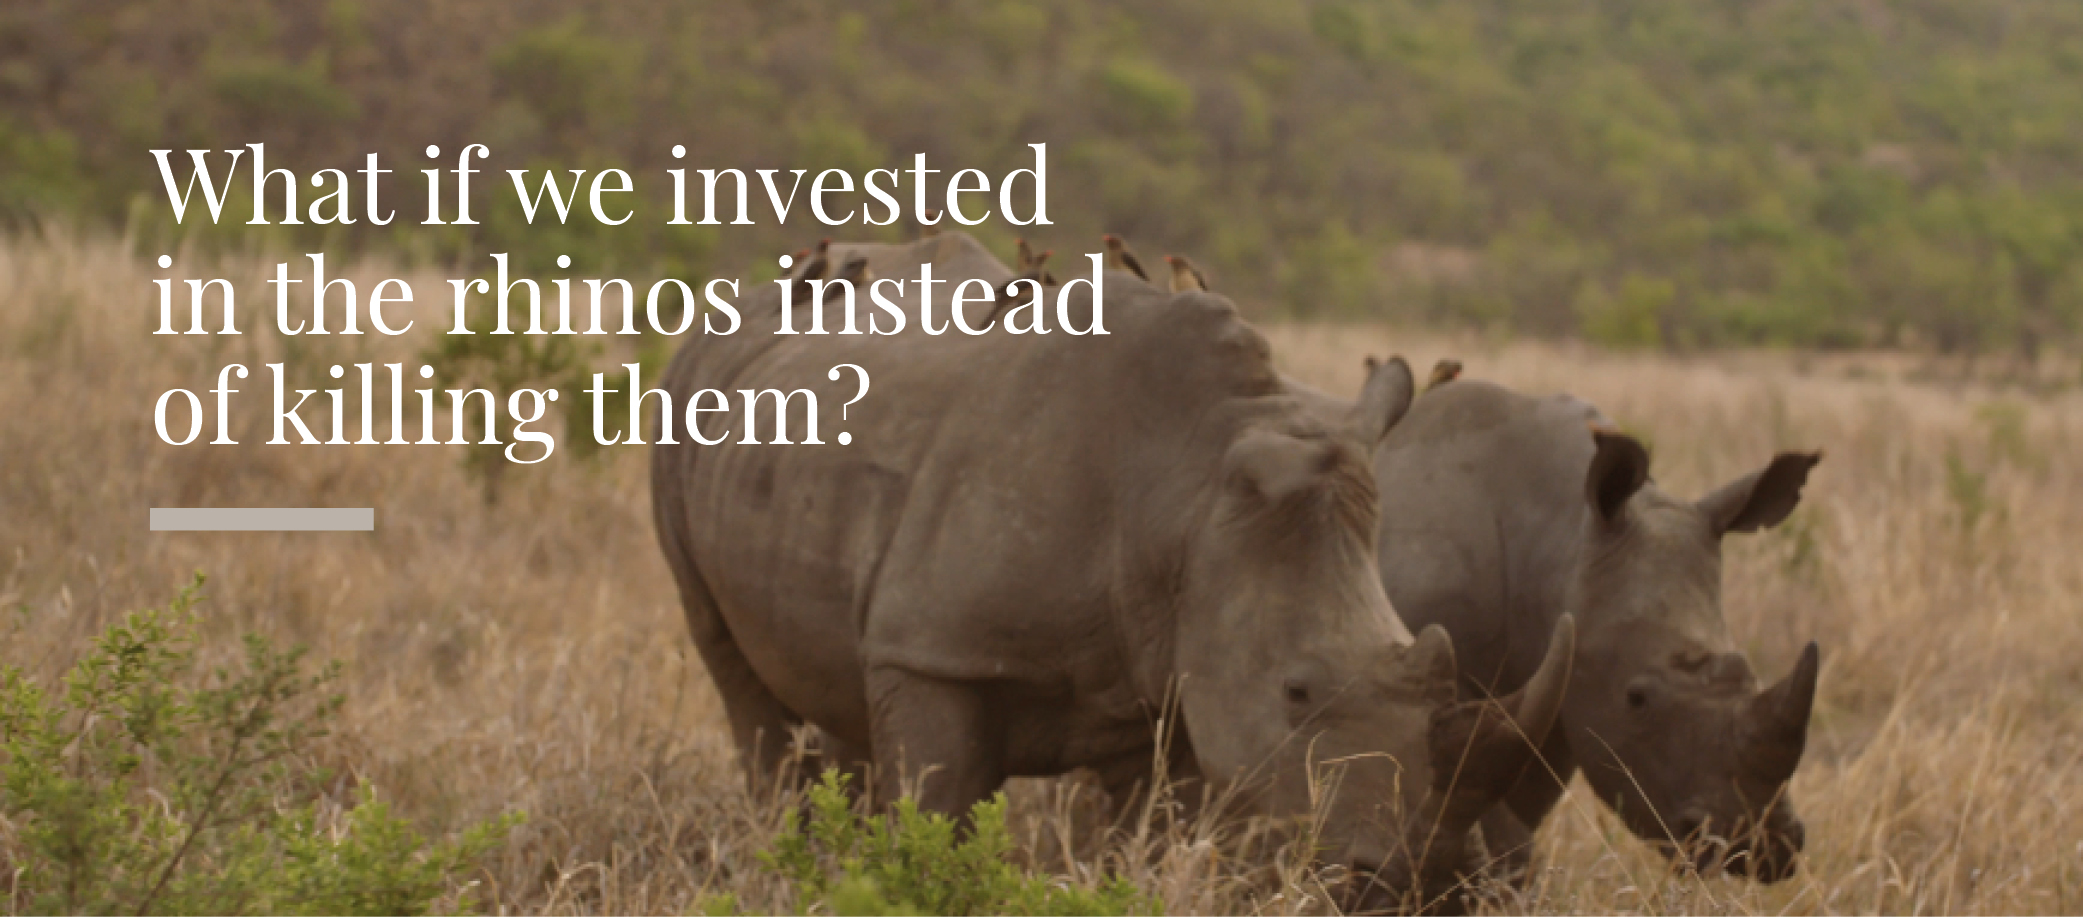 Partner with us and adopt a rhino: Make a meaningful impact in rhino conservation. Your investment helps ensure the survival of white rhinos. Find out how you can get involved with Rhino Sanctuary Namibia today.